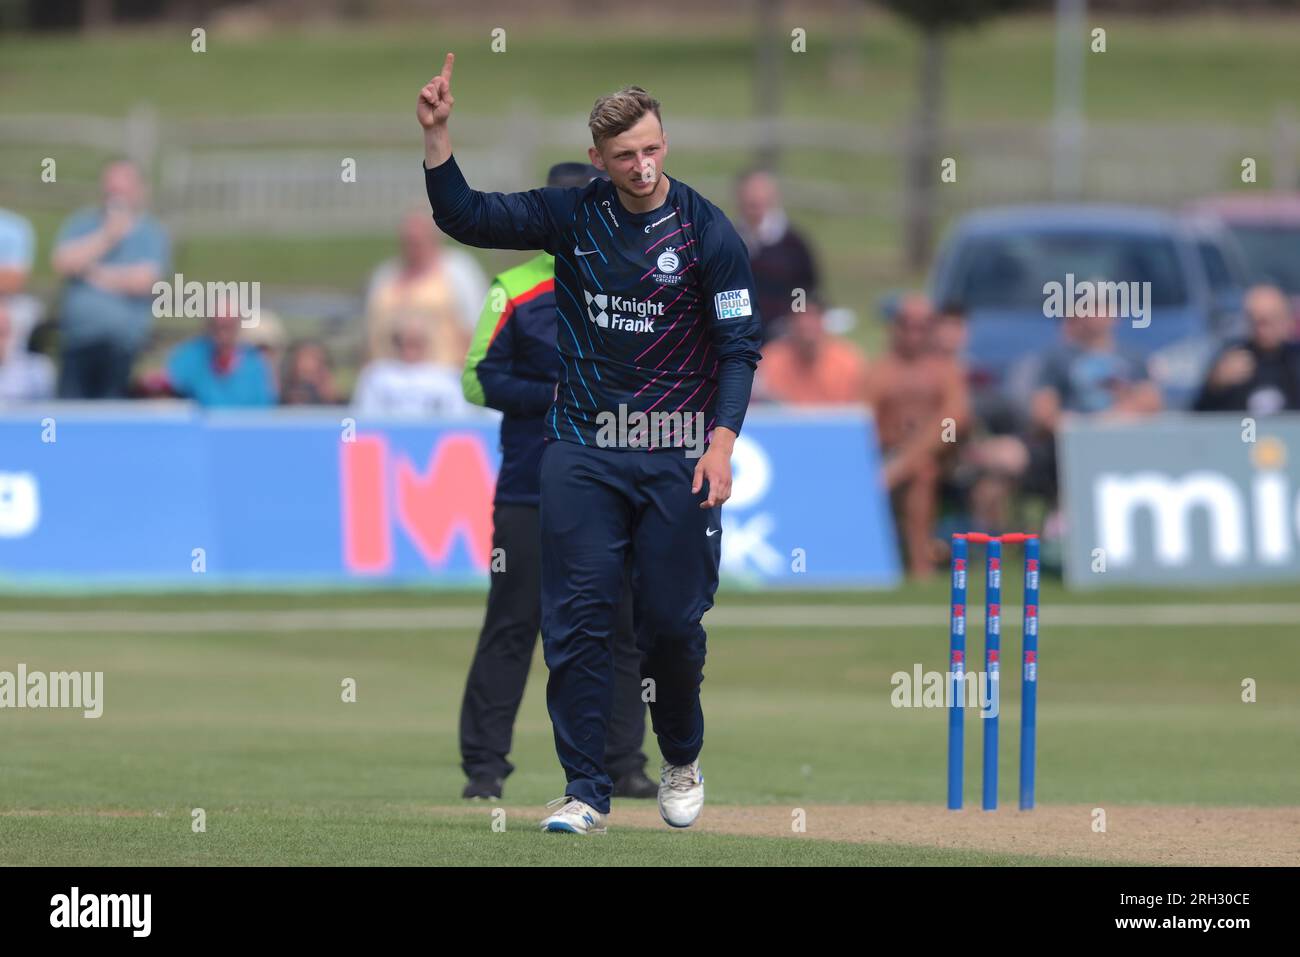 Beckenham, Kent, UK. 13th Aug, 2023. Middlesex's Luke Hollman celebrates after getting the wicket of Alex Blake as Kent take on Middlesex in the Metro Bank One Day Cup at Beckenham. Credit: David Rowe/Alamy Live News Stock Photo